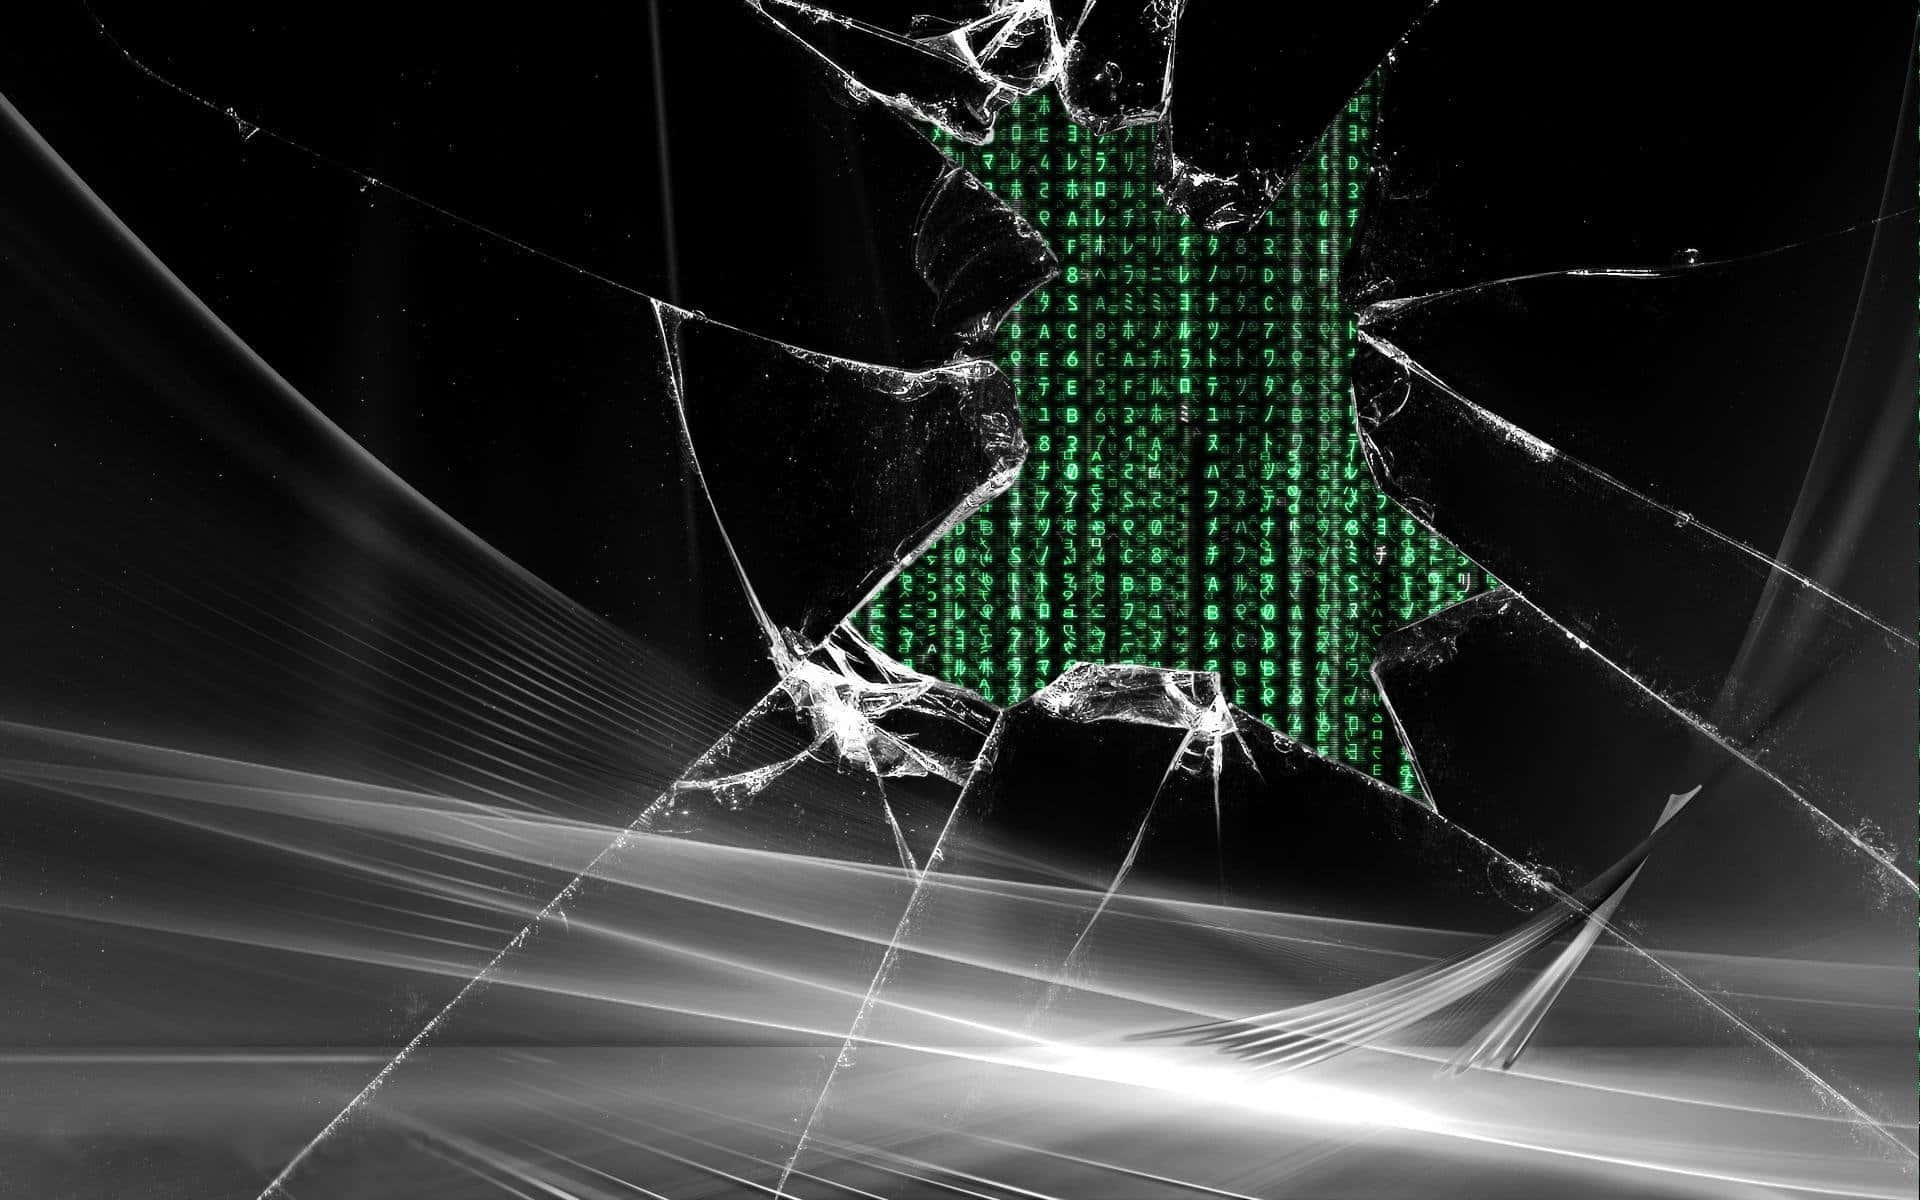 Get the Most Out of your iPhone with the Matrix Wallpaper